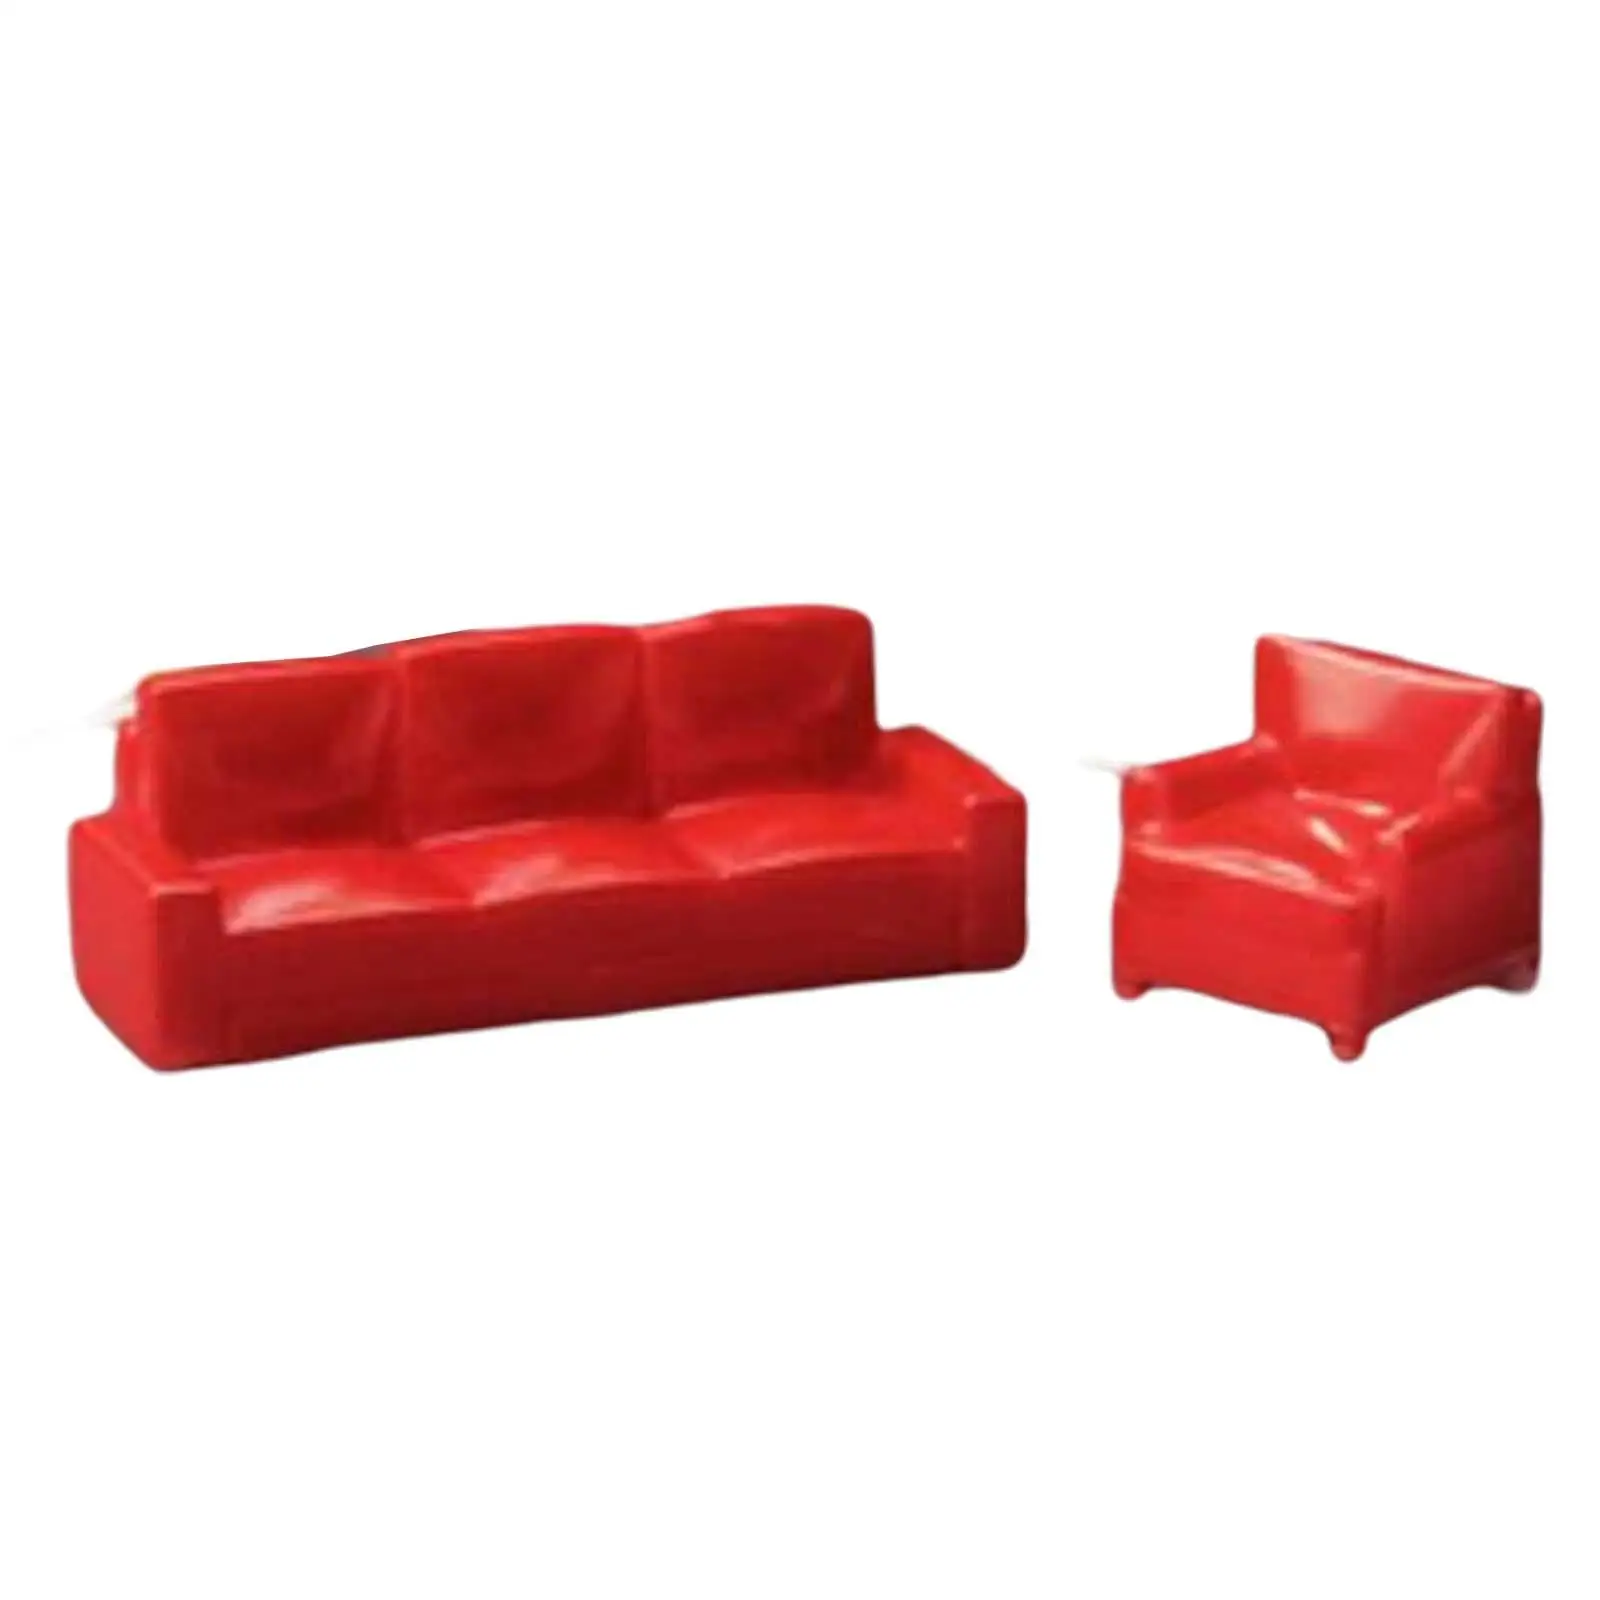 2x Dollhouse Sofa Couch for 1/64 Scale Dollhouse DIY Model Photography Props